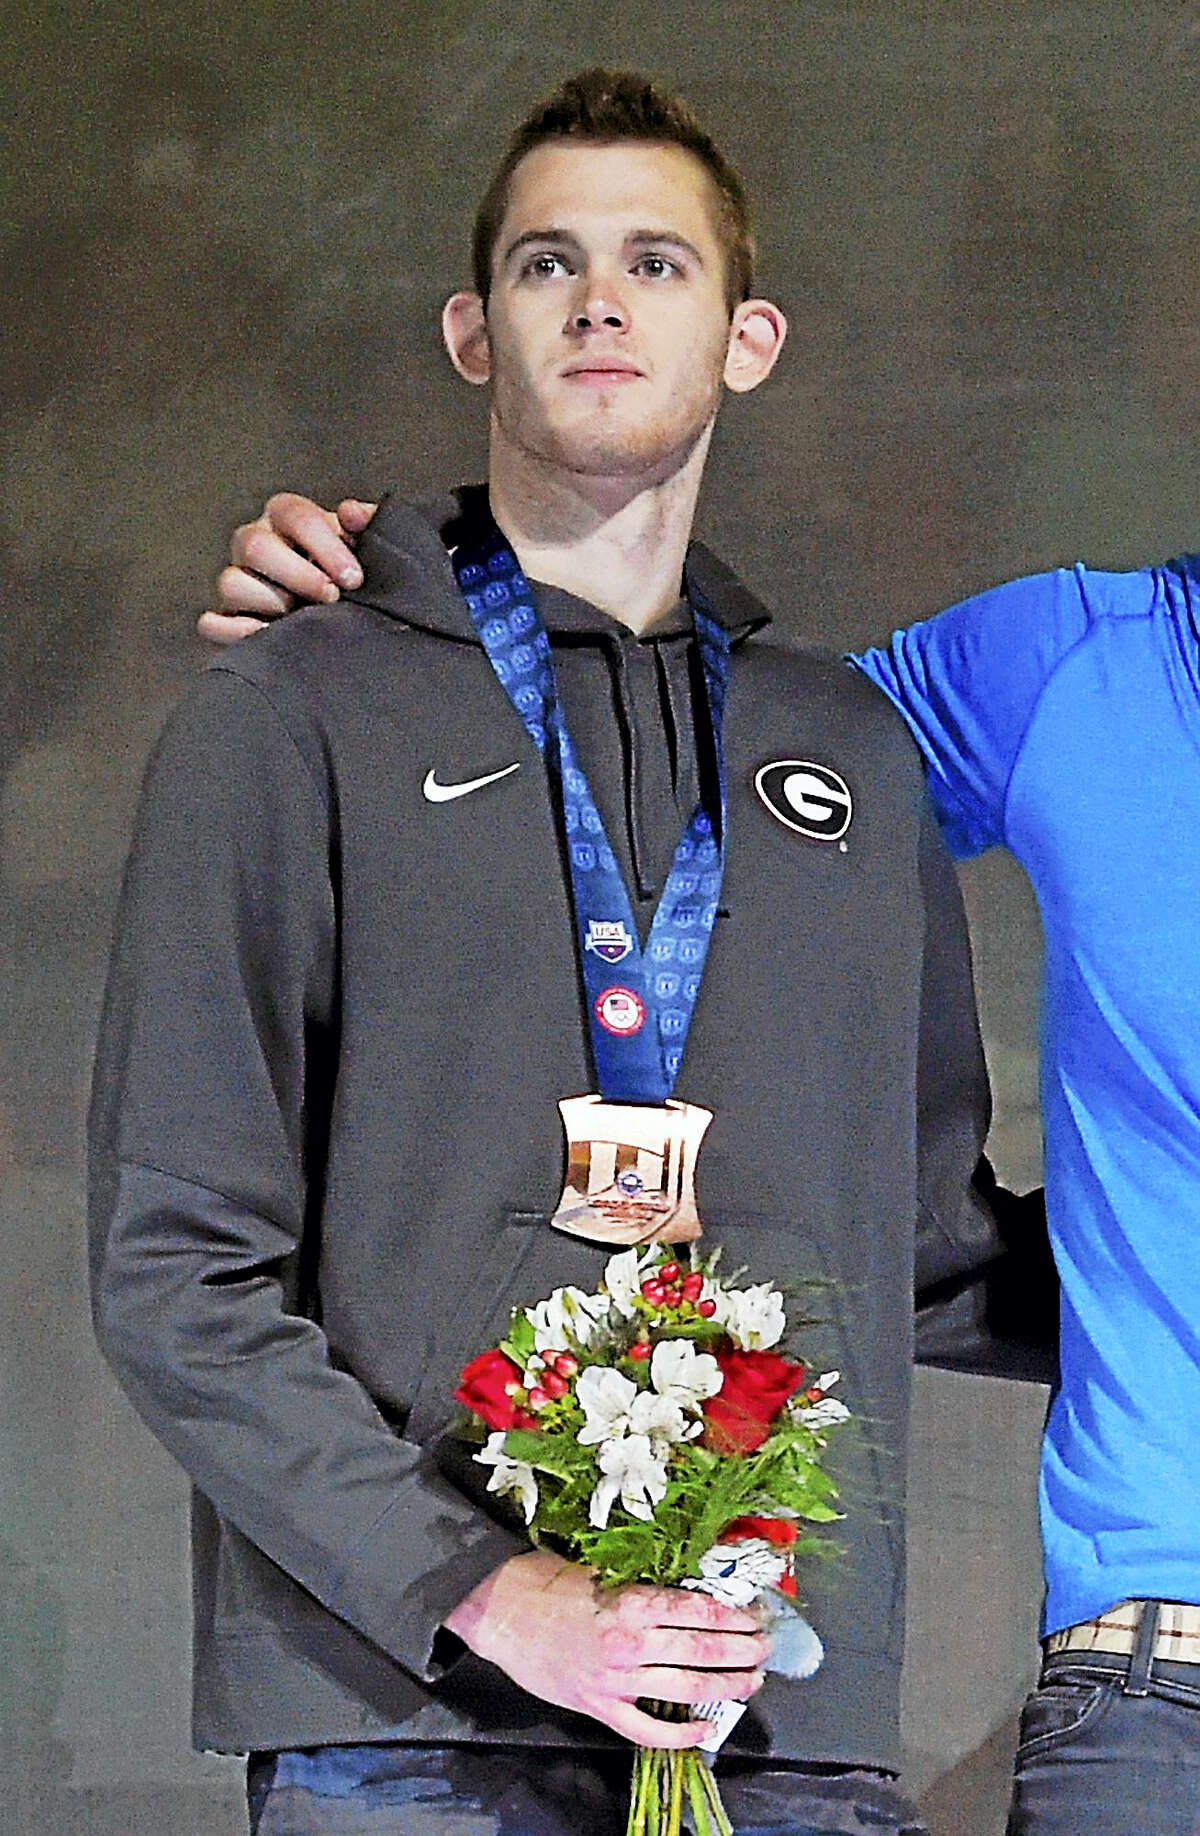 Gunnar Bentz stands with teammates during the men’s 400-meter relay team medal ceremony at the U.S. Olympic swimming trials in Omaha, Neb. The U.S. Olympic Committee said on Wednesday, Aug. 17, 2016 that two American swimmers were taken off their flight from Brazil by local authorities amid an investigation into a reported robbery involving Ryan Lochte and his teammates. USOC spokesman Patrick Sandusky said that “Jack Conger and Gunnar Bentz were removed from their flight to the United States by Brazilian authorities. We are gathering further information.”